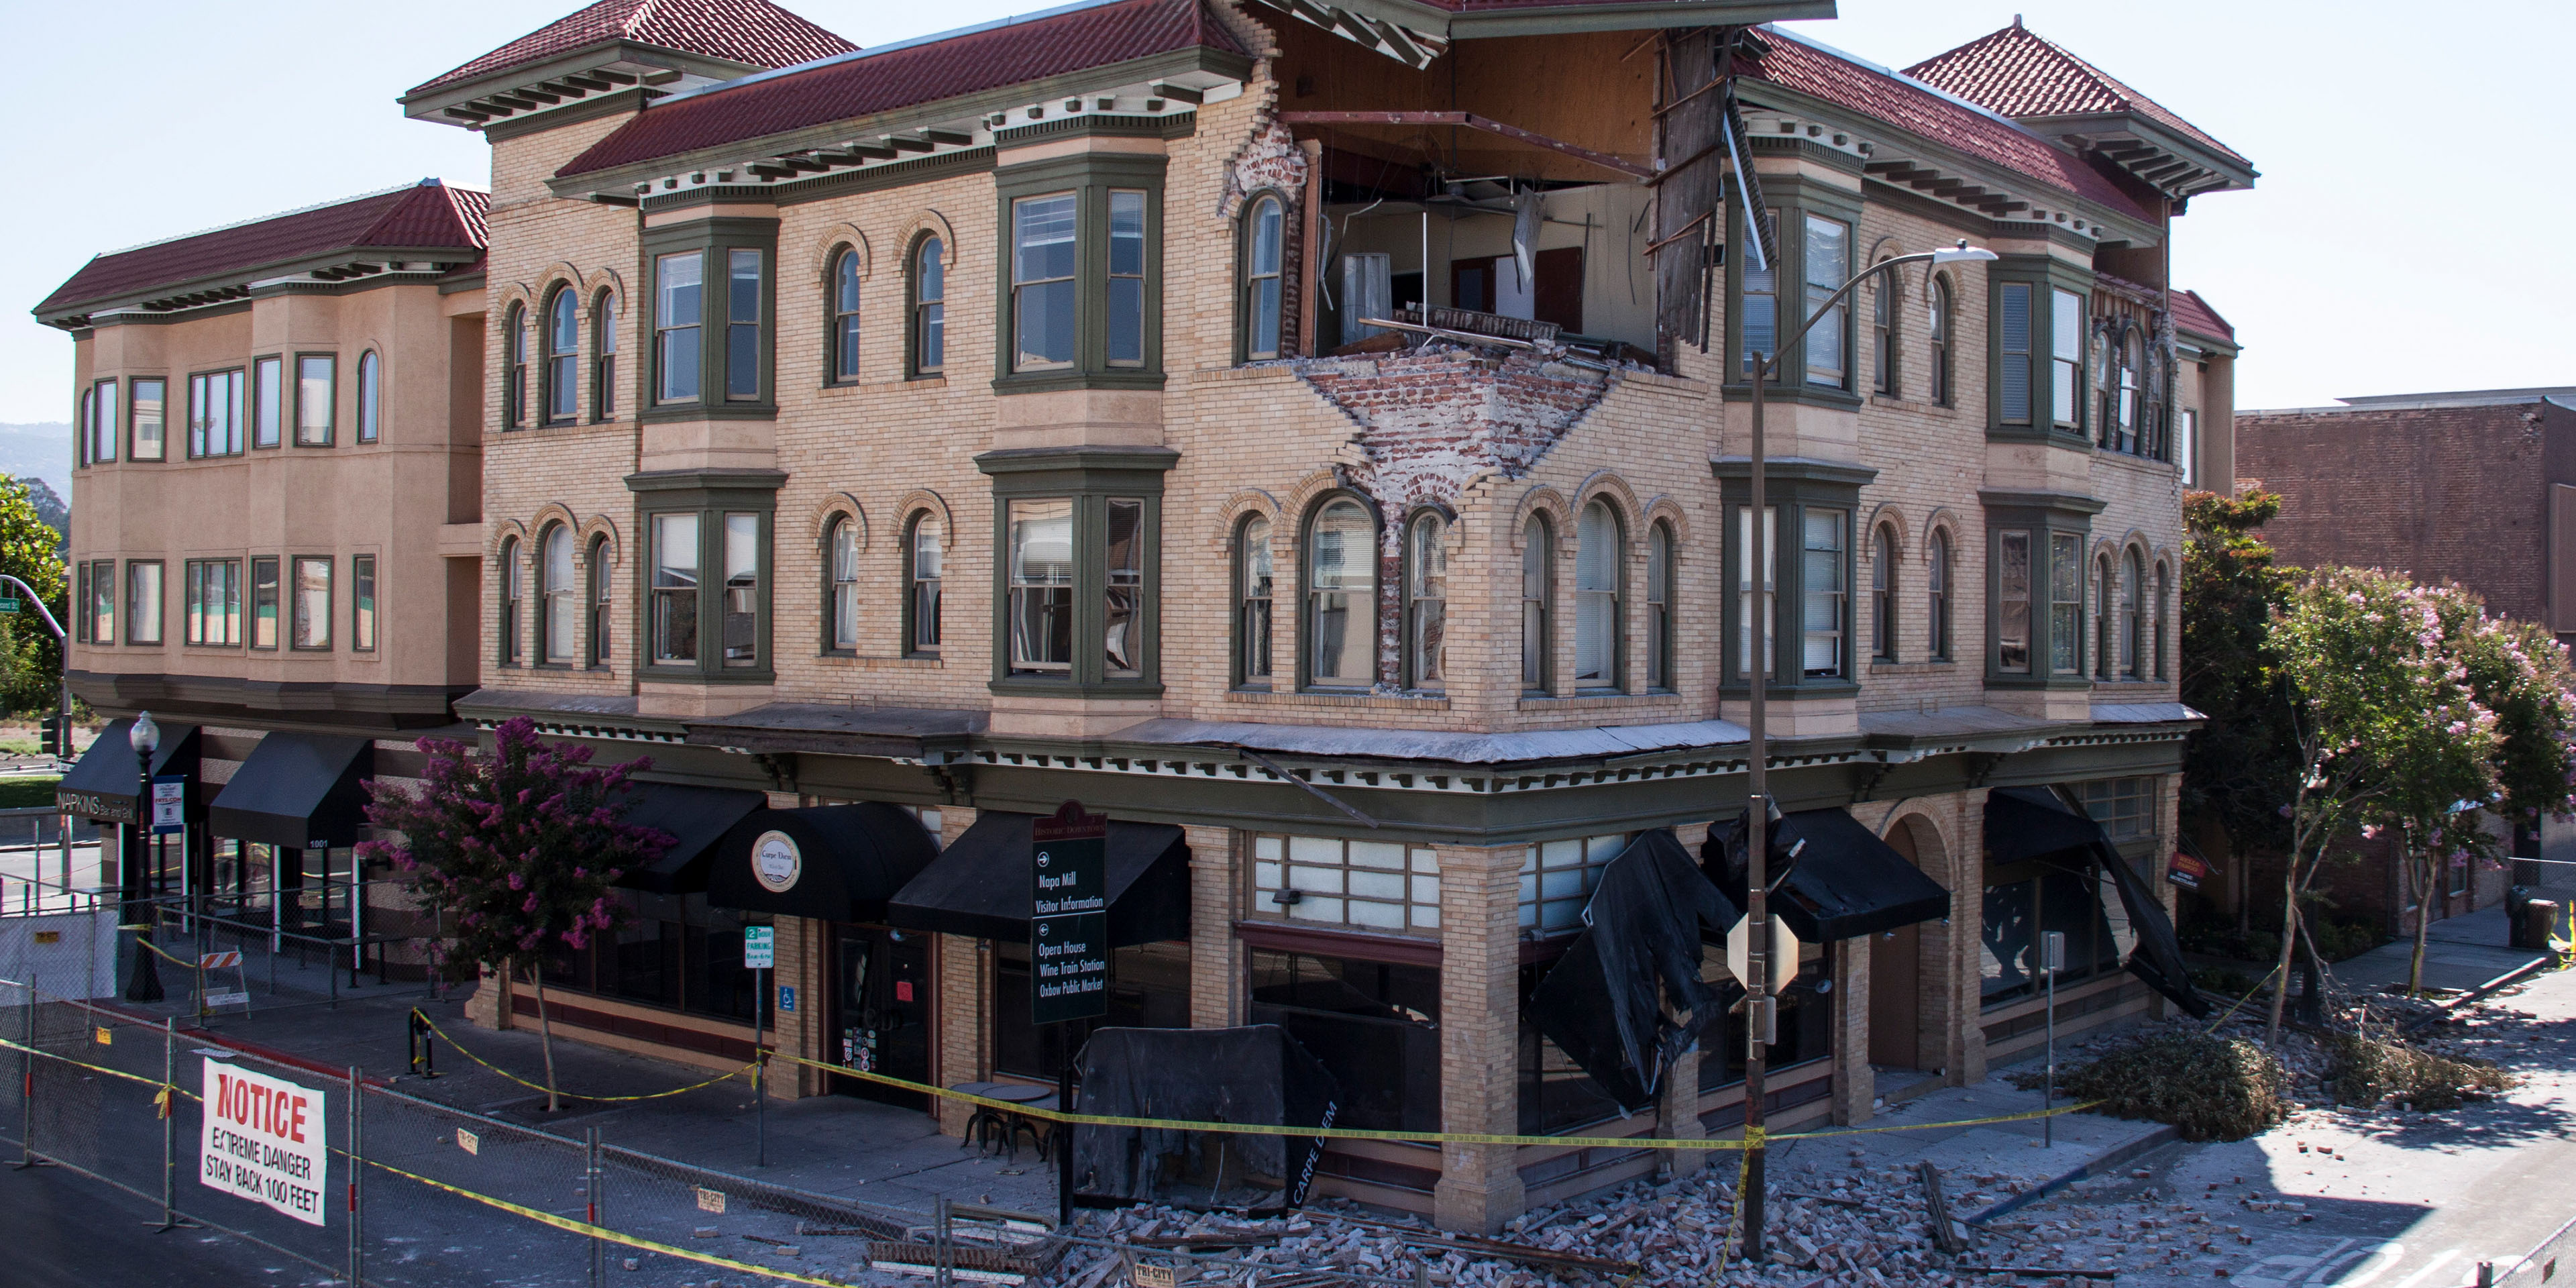 Building with collapsed roof and missing wall after an earthquake